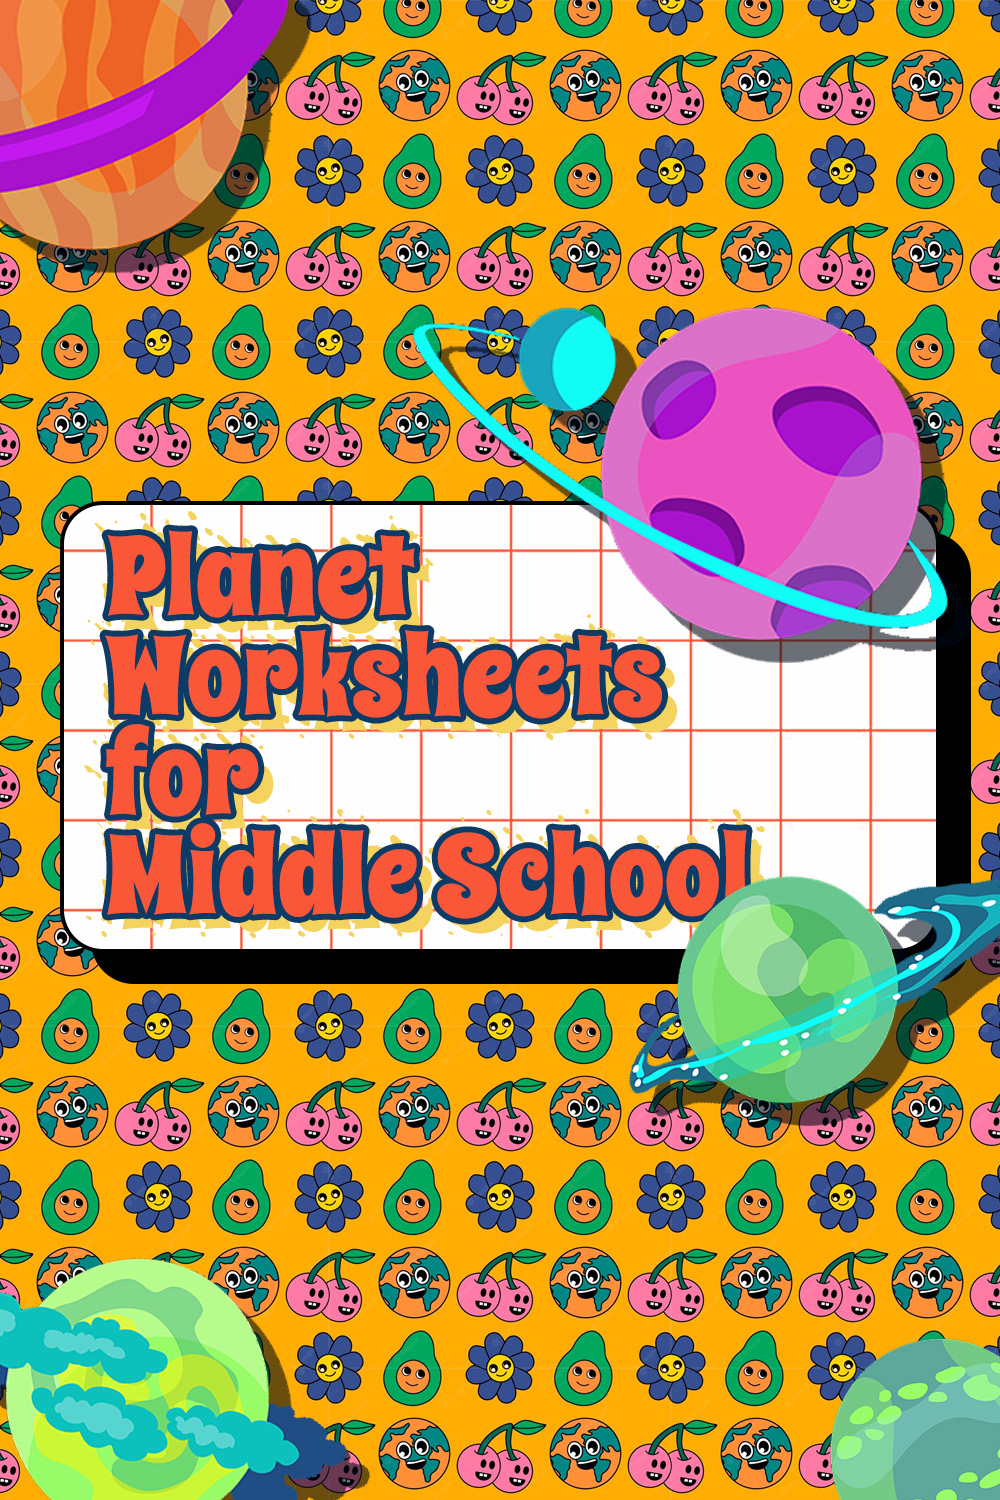 Planet Worksheets for Middle School